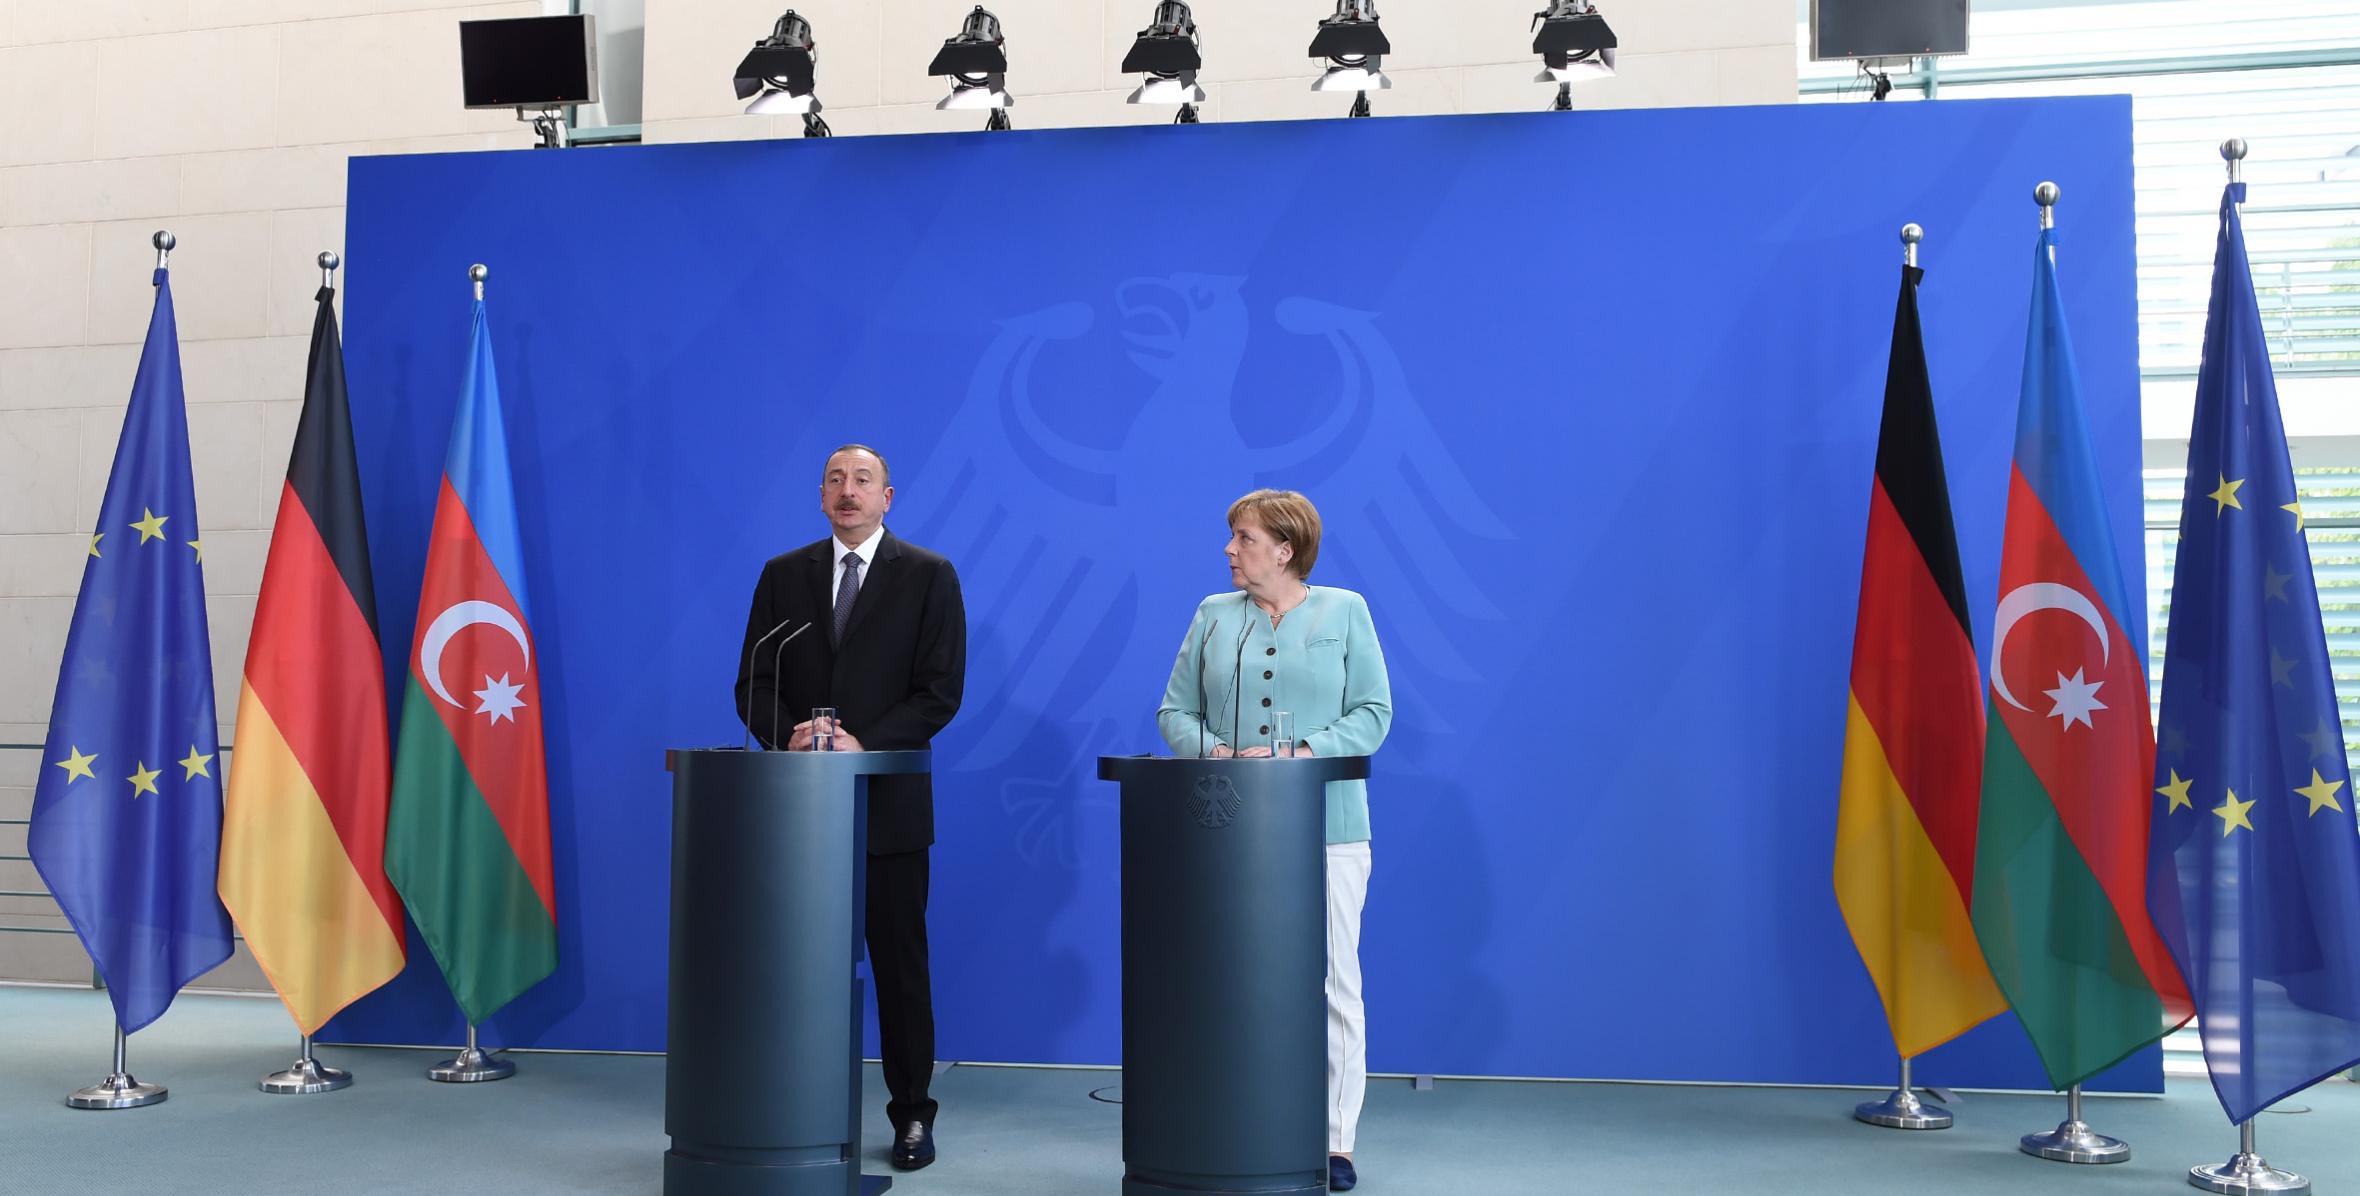 Ilham Aliyev and Chancellor of the Federal Republic of Germany Angela Merkel gave a press conference